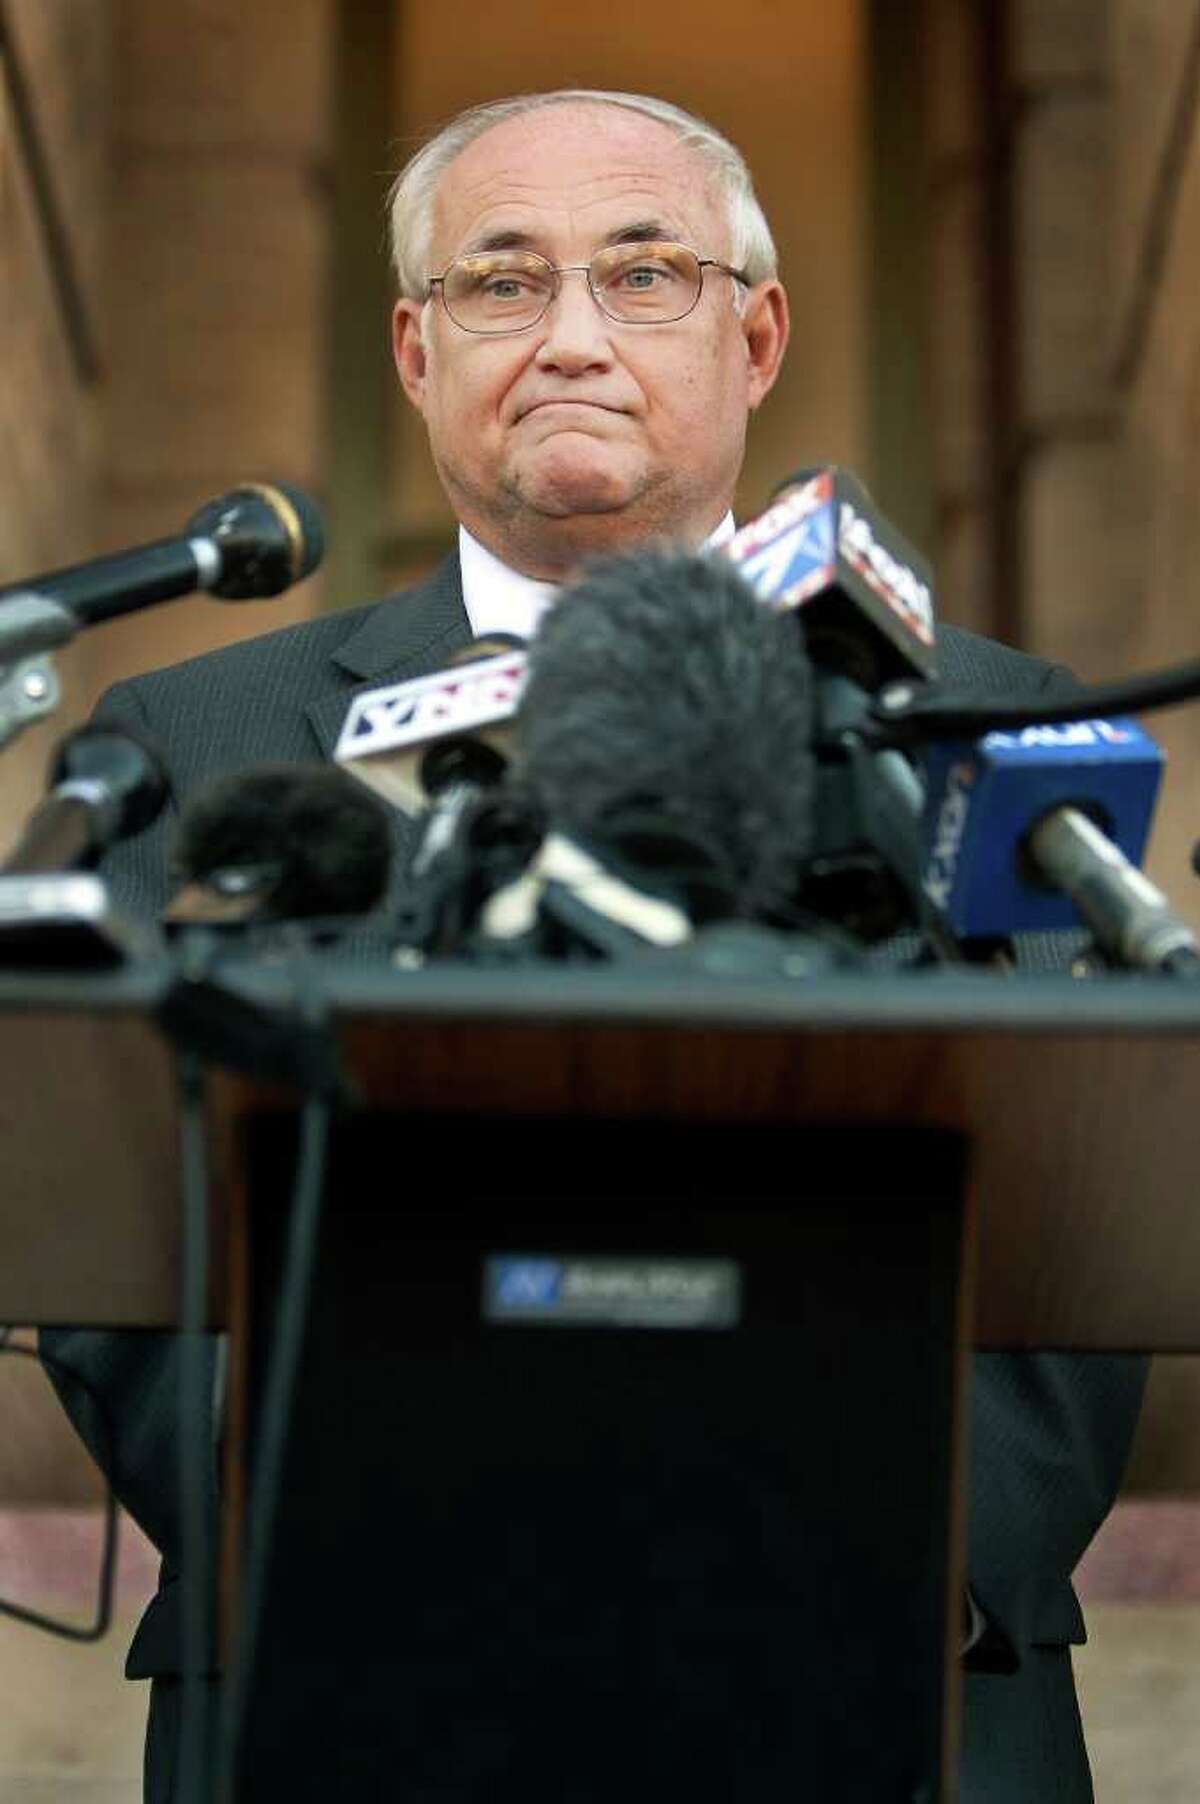 In the Nov. 16, 2011 file photo, Williamson County District Judge Ken Anderson gestures at a news conference in Georgetown, Texas.